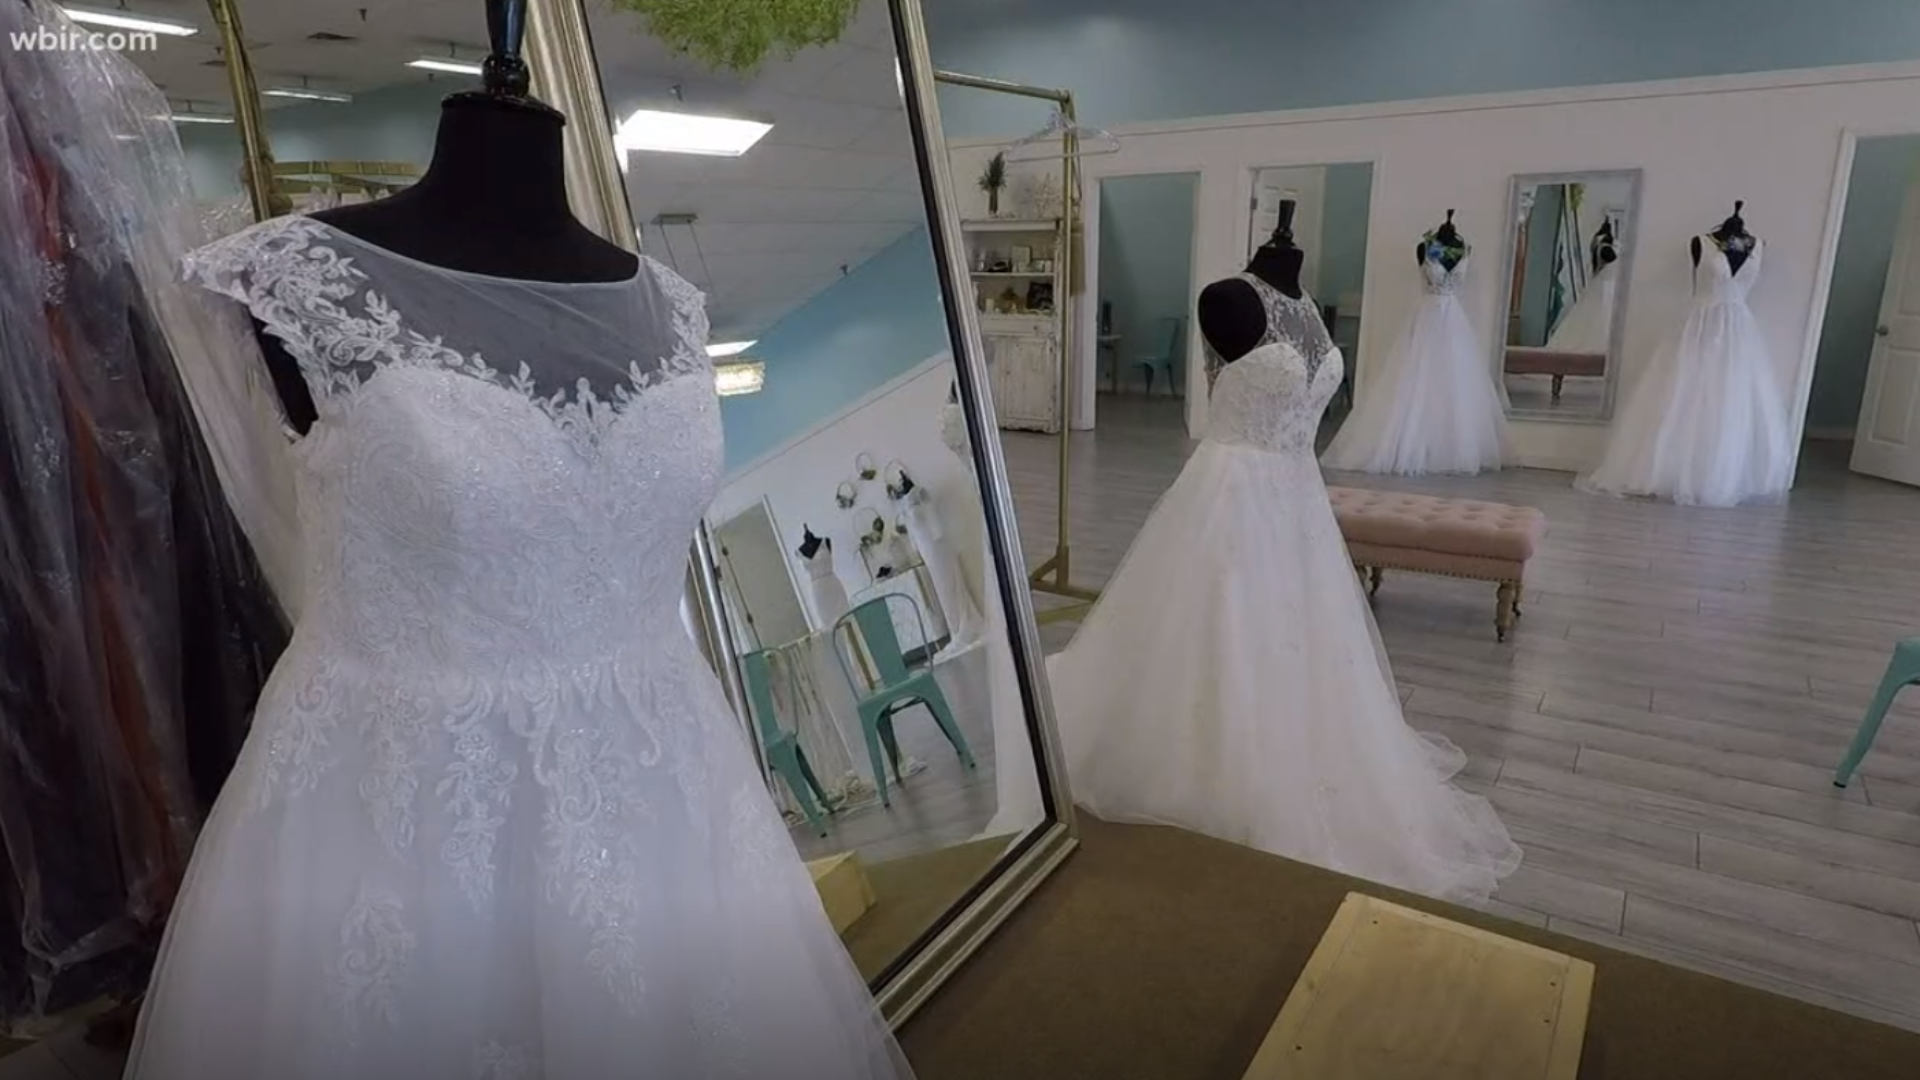 With a lot of wedding dresses made in China, a lot of factories have had to close during the outbreak.